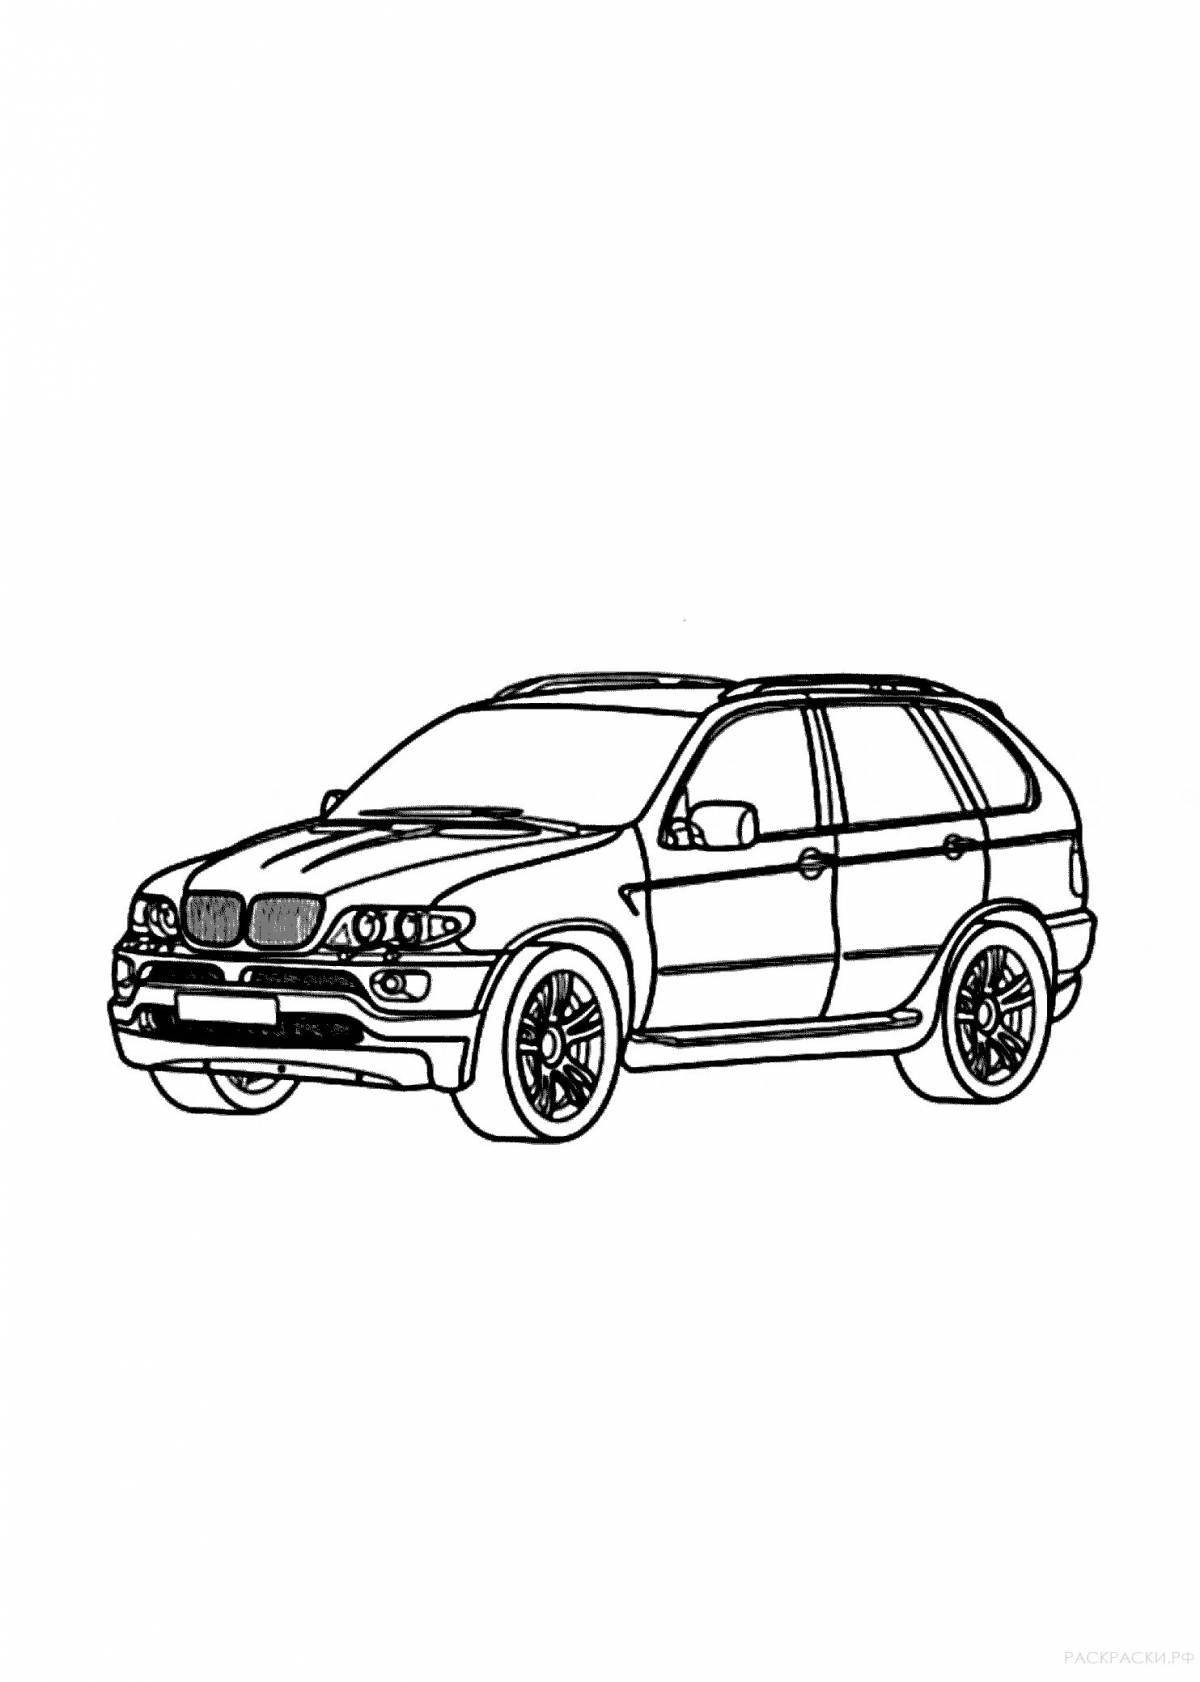 Playful bmw jeep coloring page